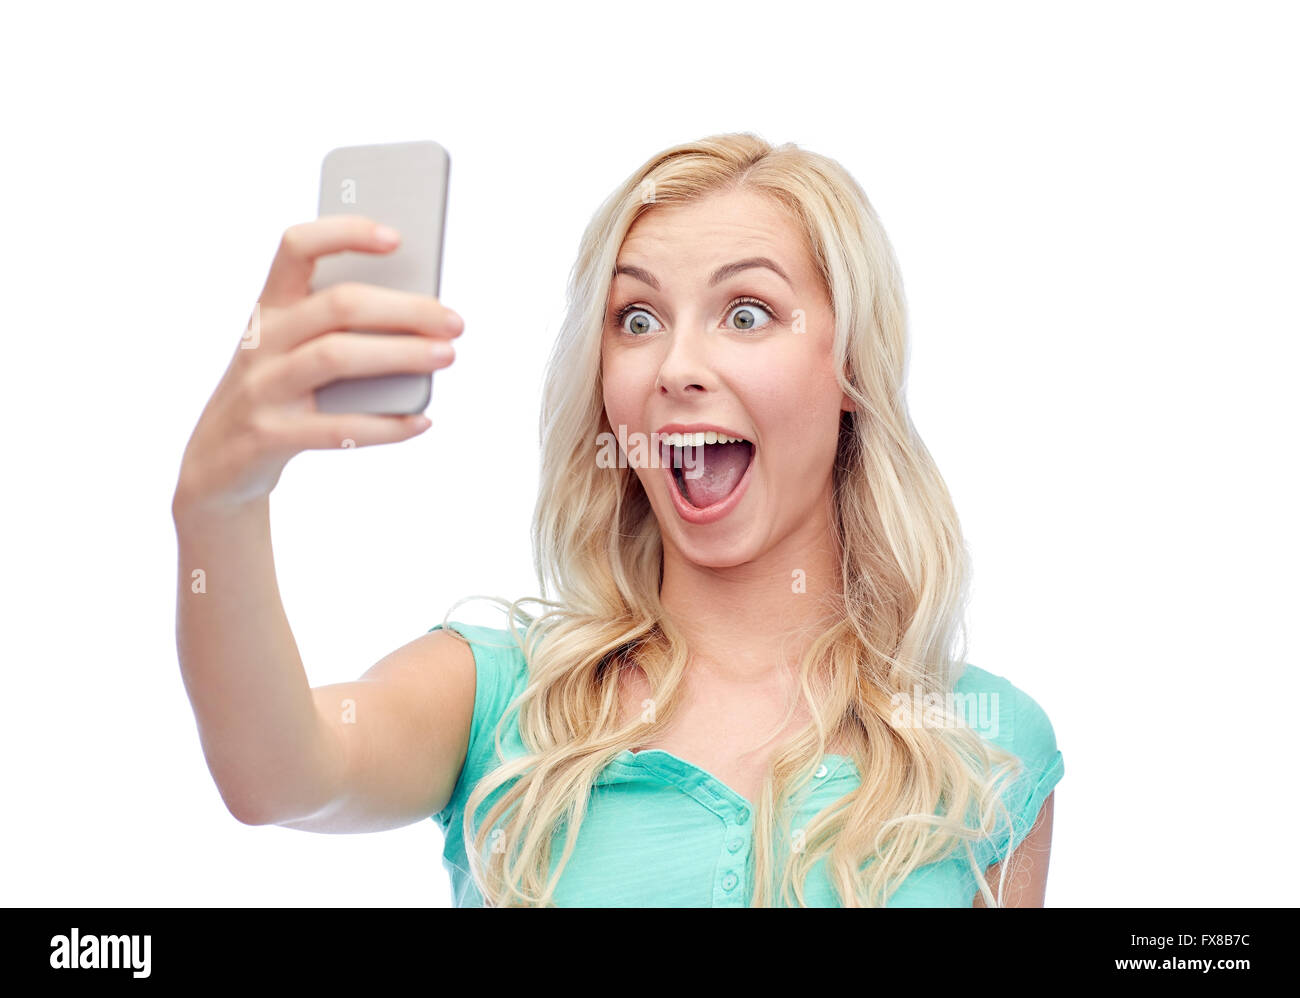 Smiling young woman with smartphone selfies Banque D'Images